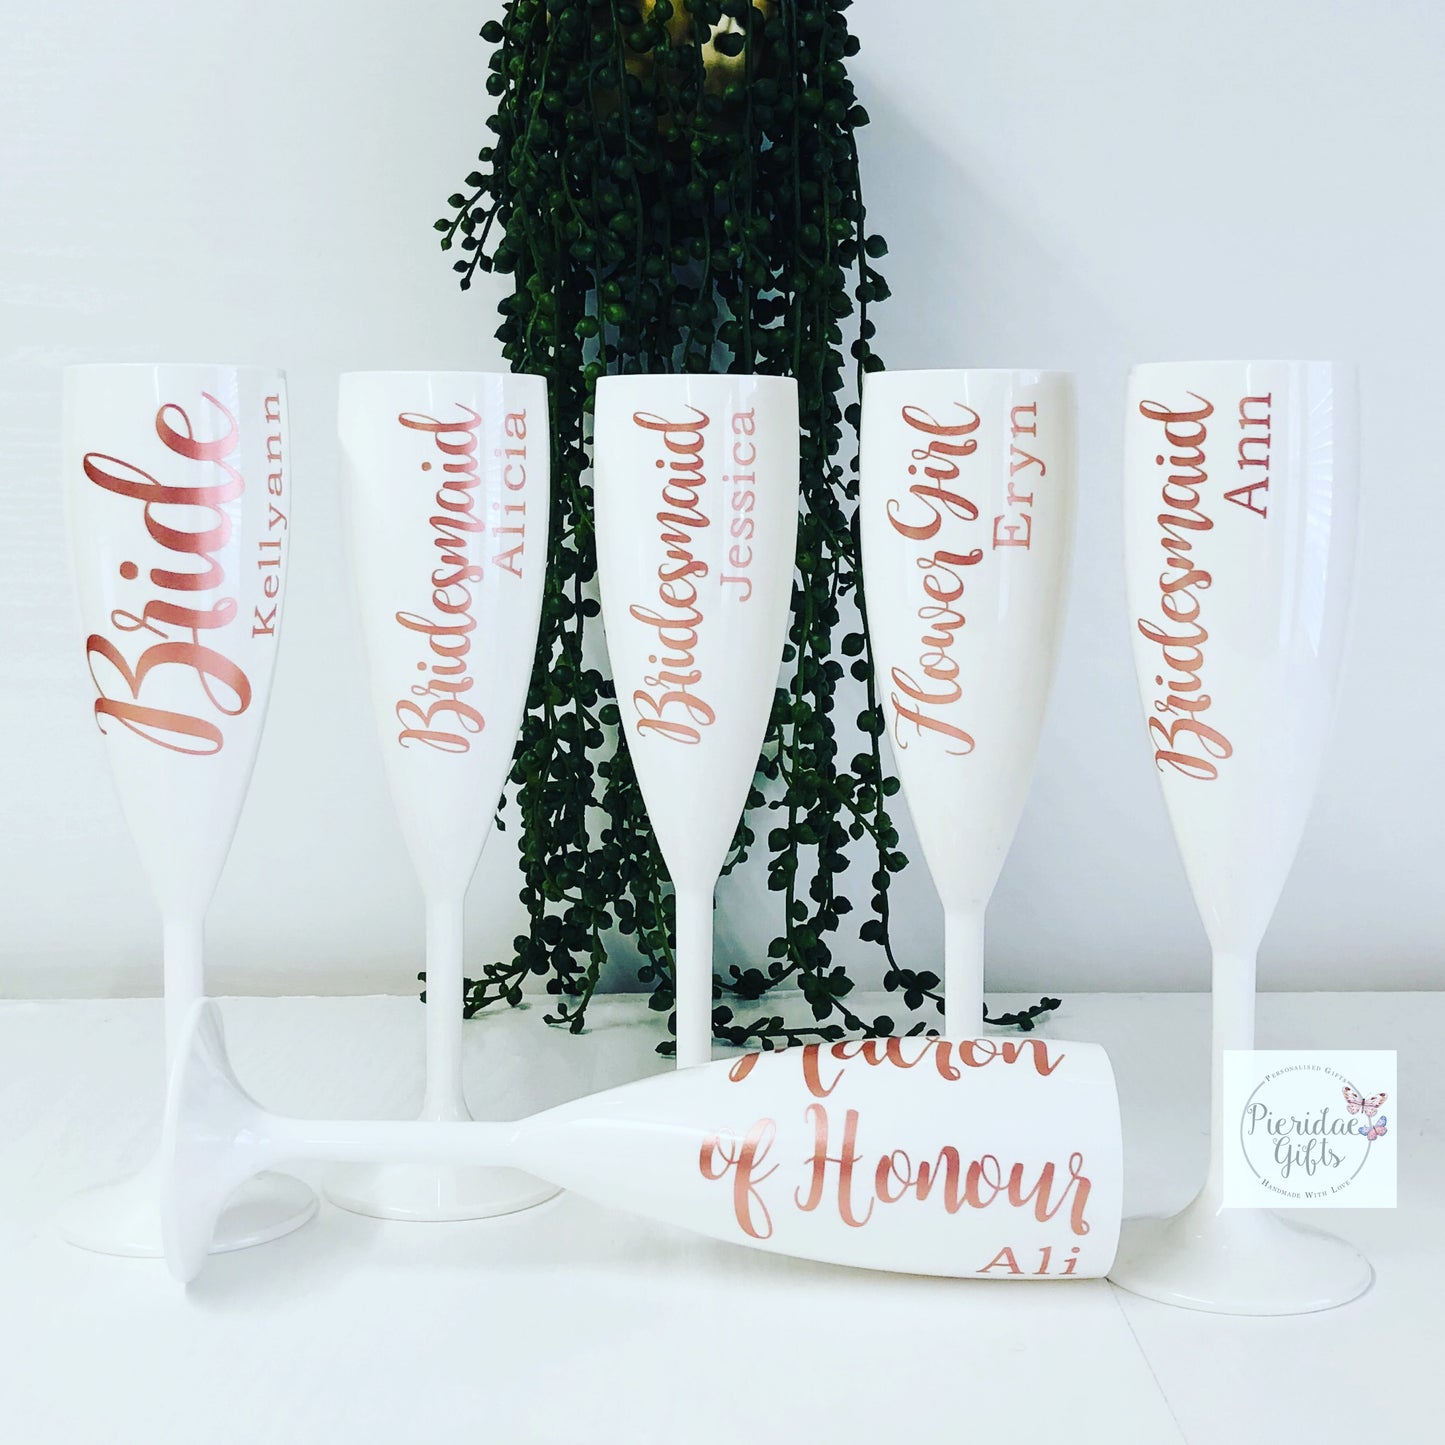 Personalised White Reusable Plastic Champagne Flute